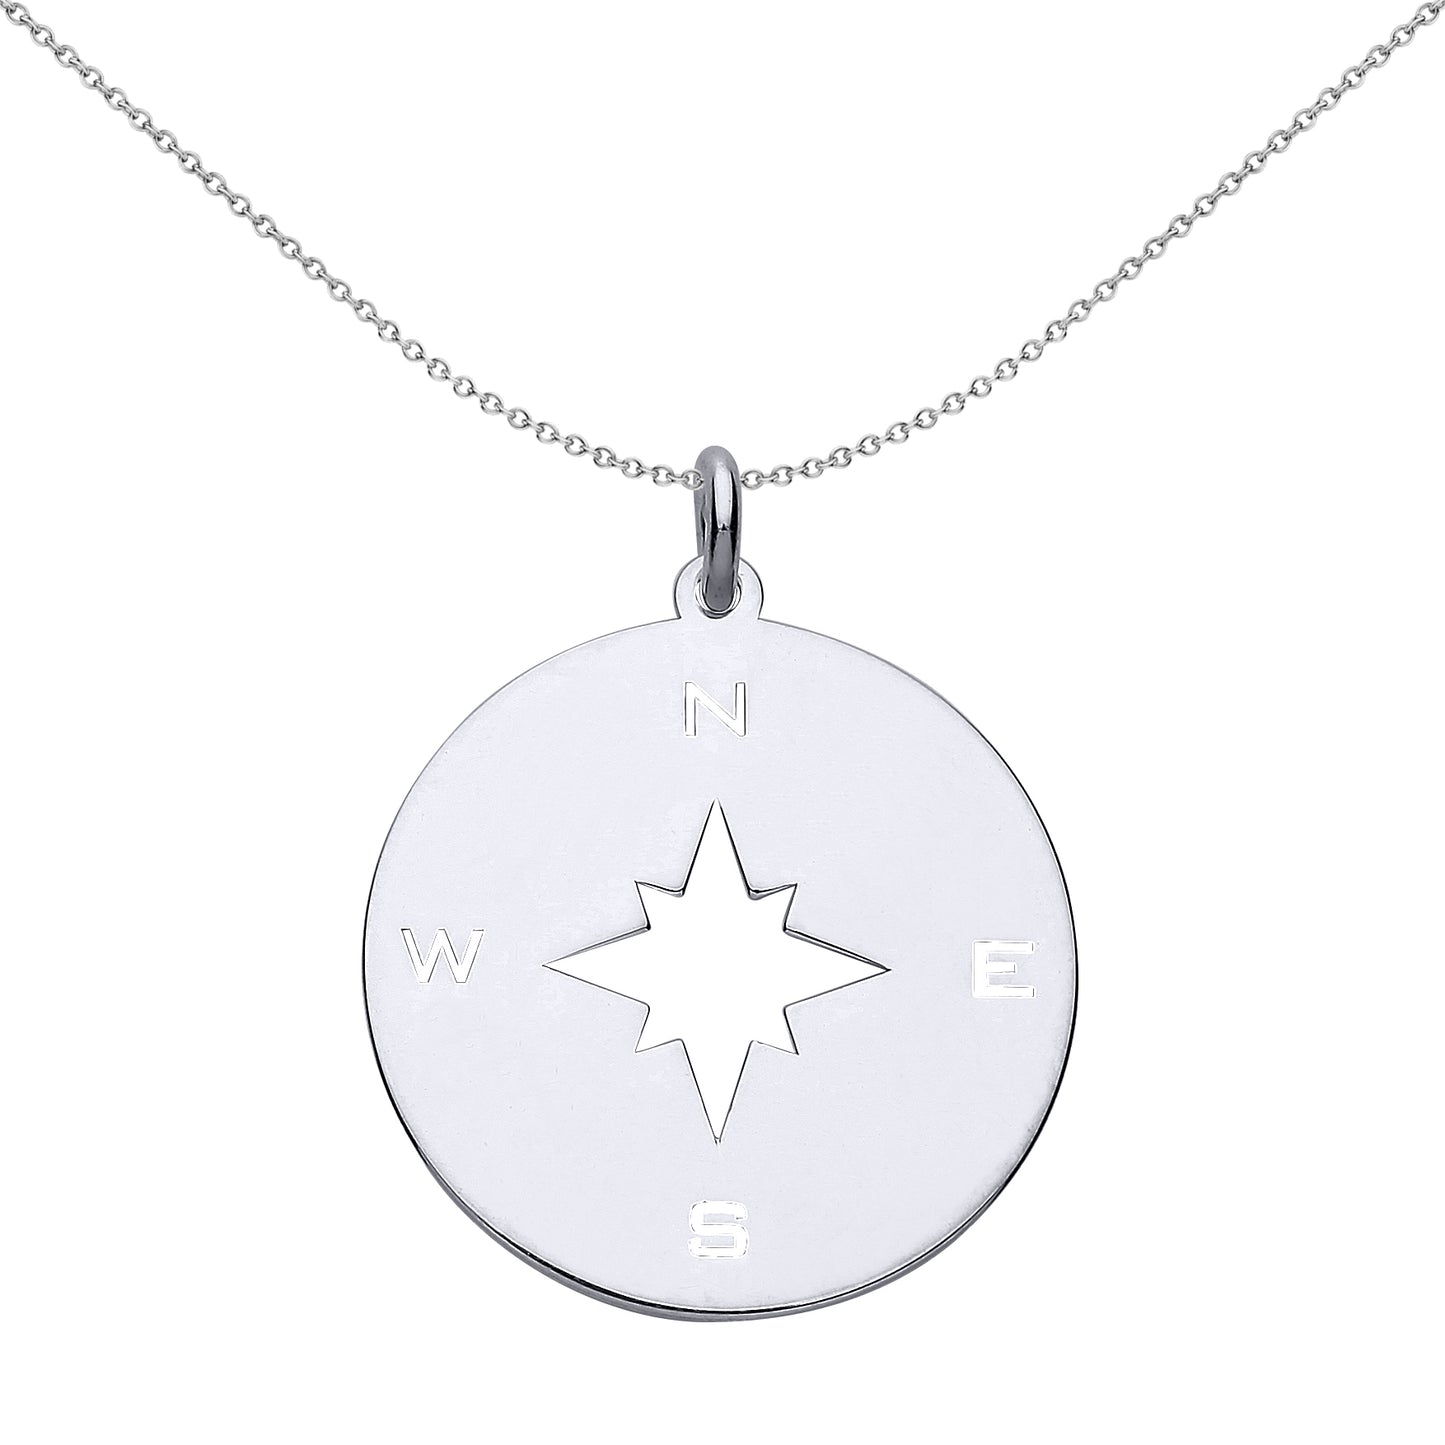 Silver  NSEW Compass Medallion Necklace 18 inch - GVP495